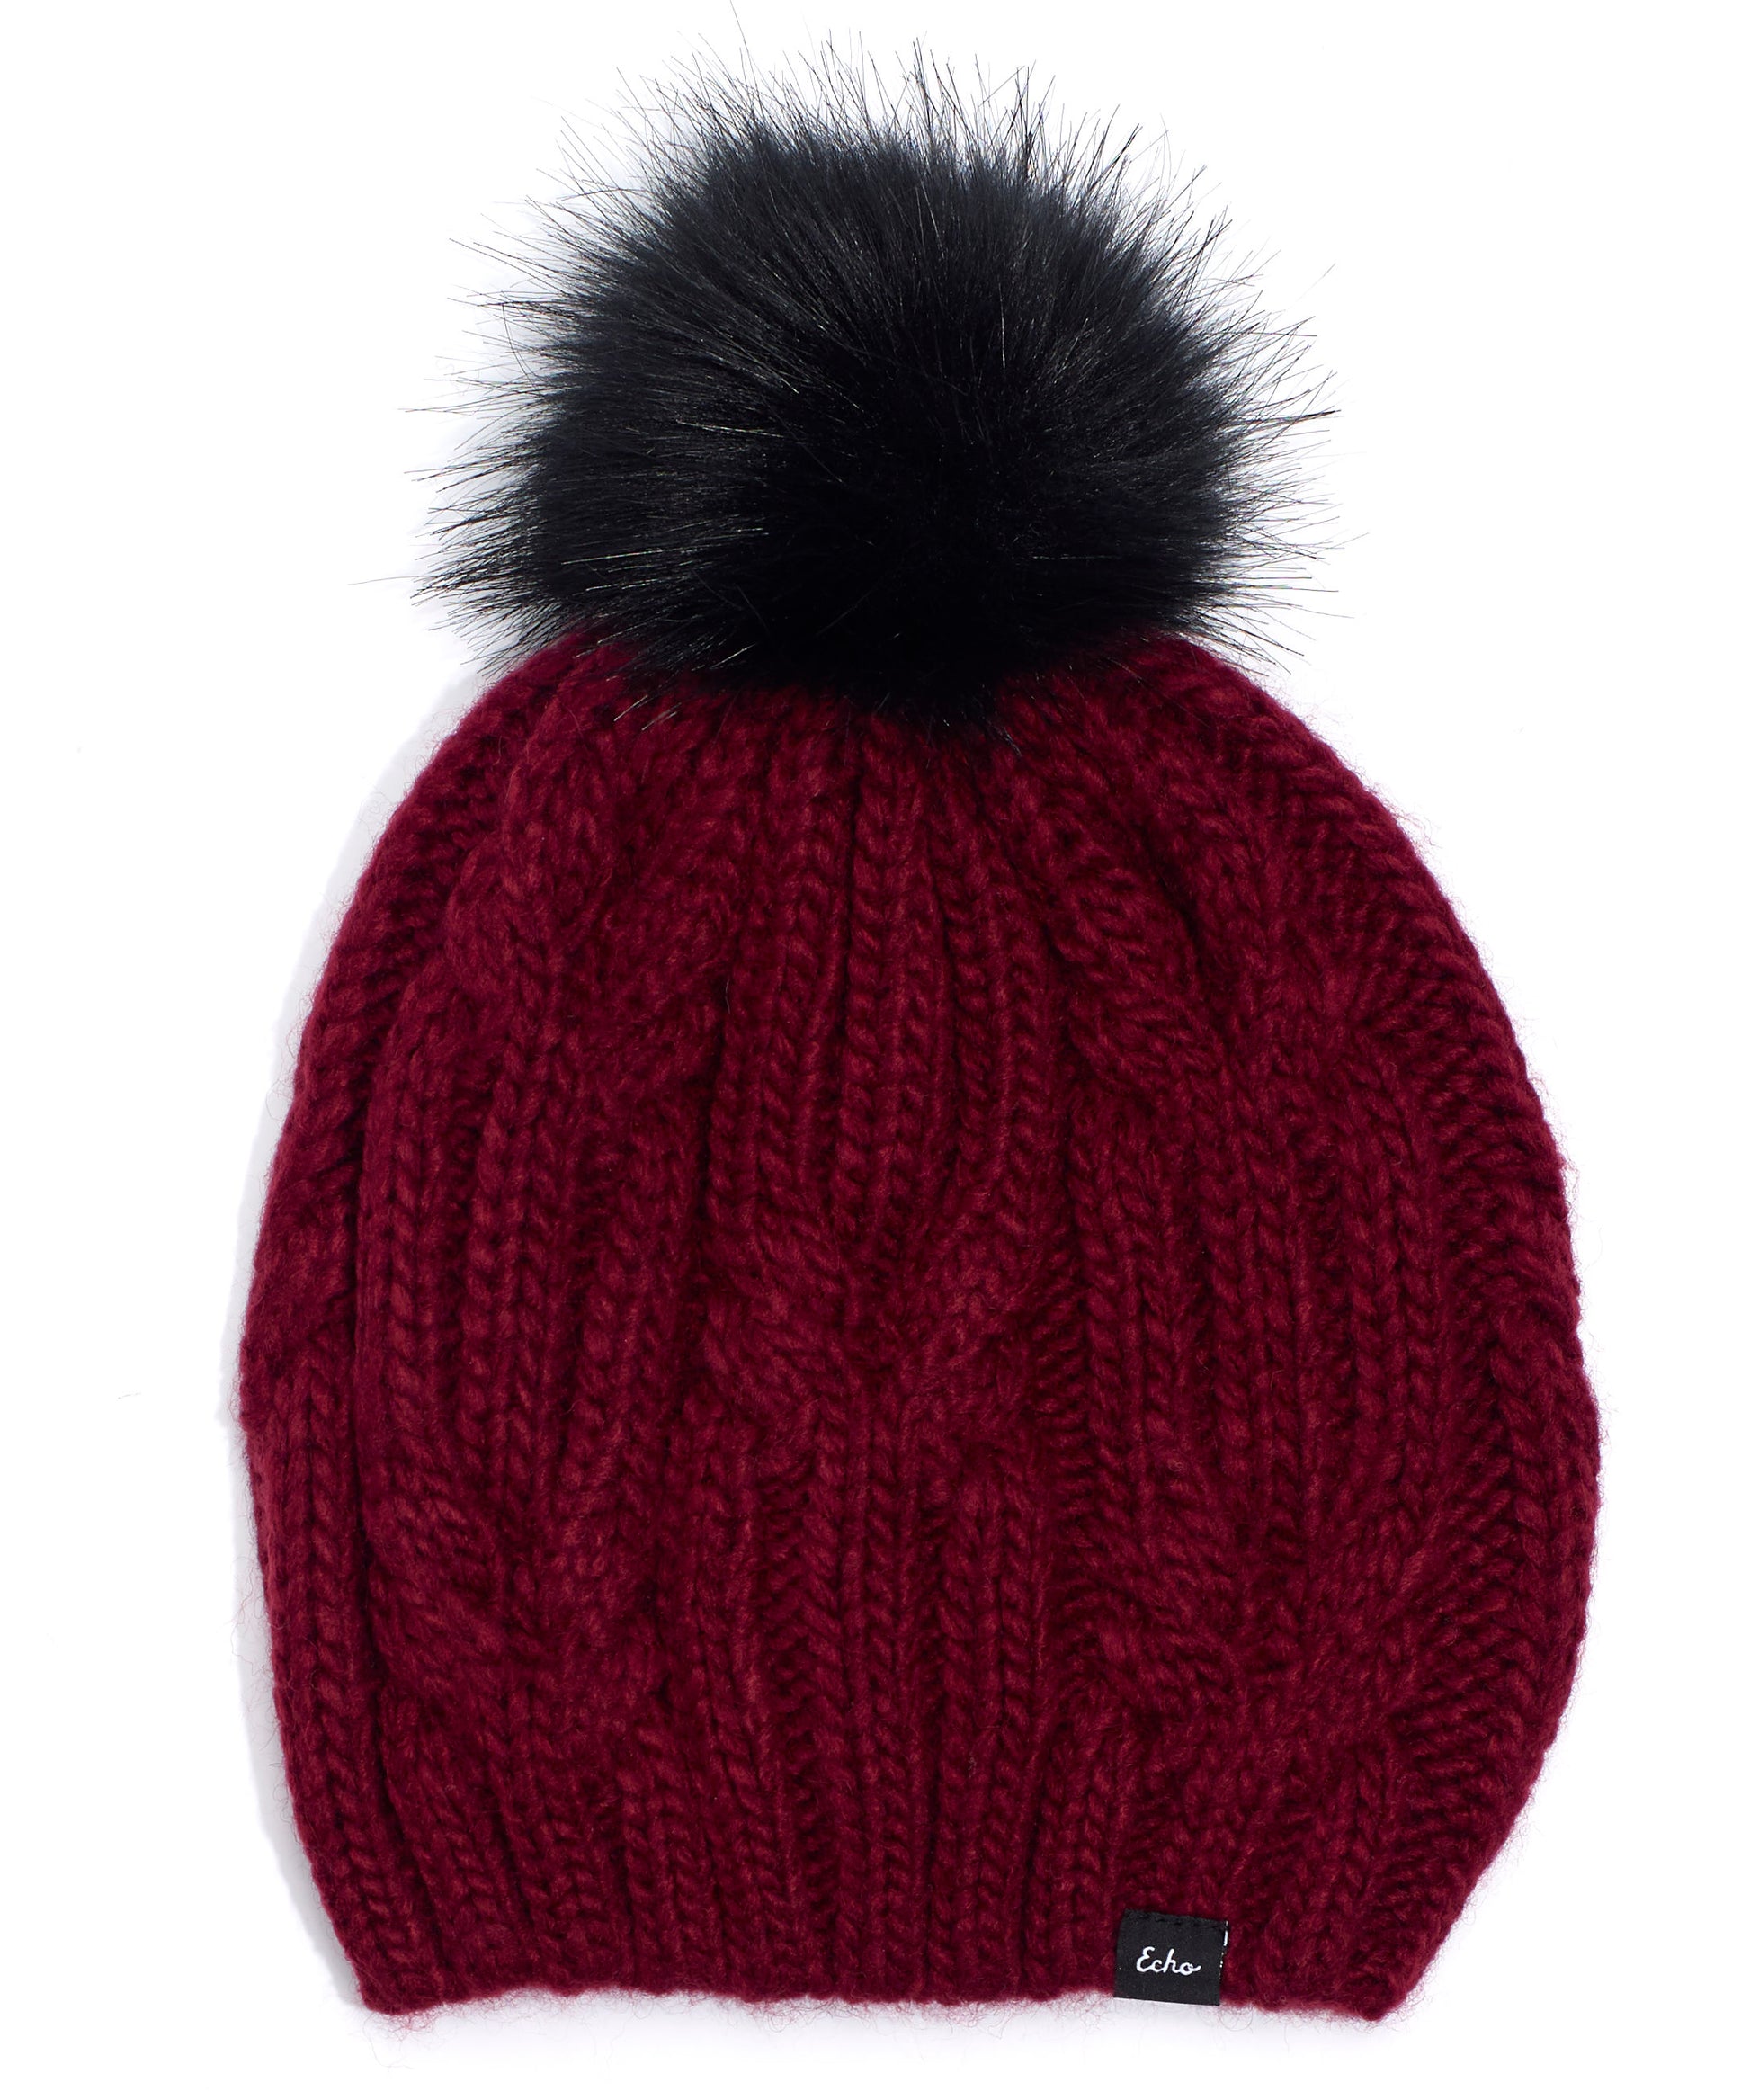 Twisted Cable Pom Hat in color Rhubarb